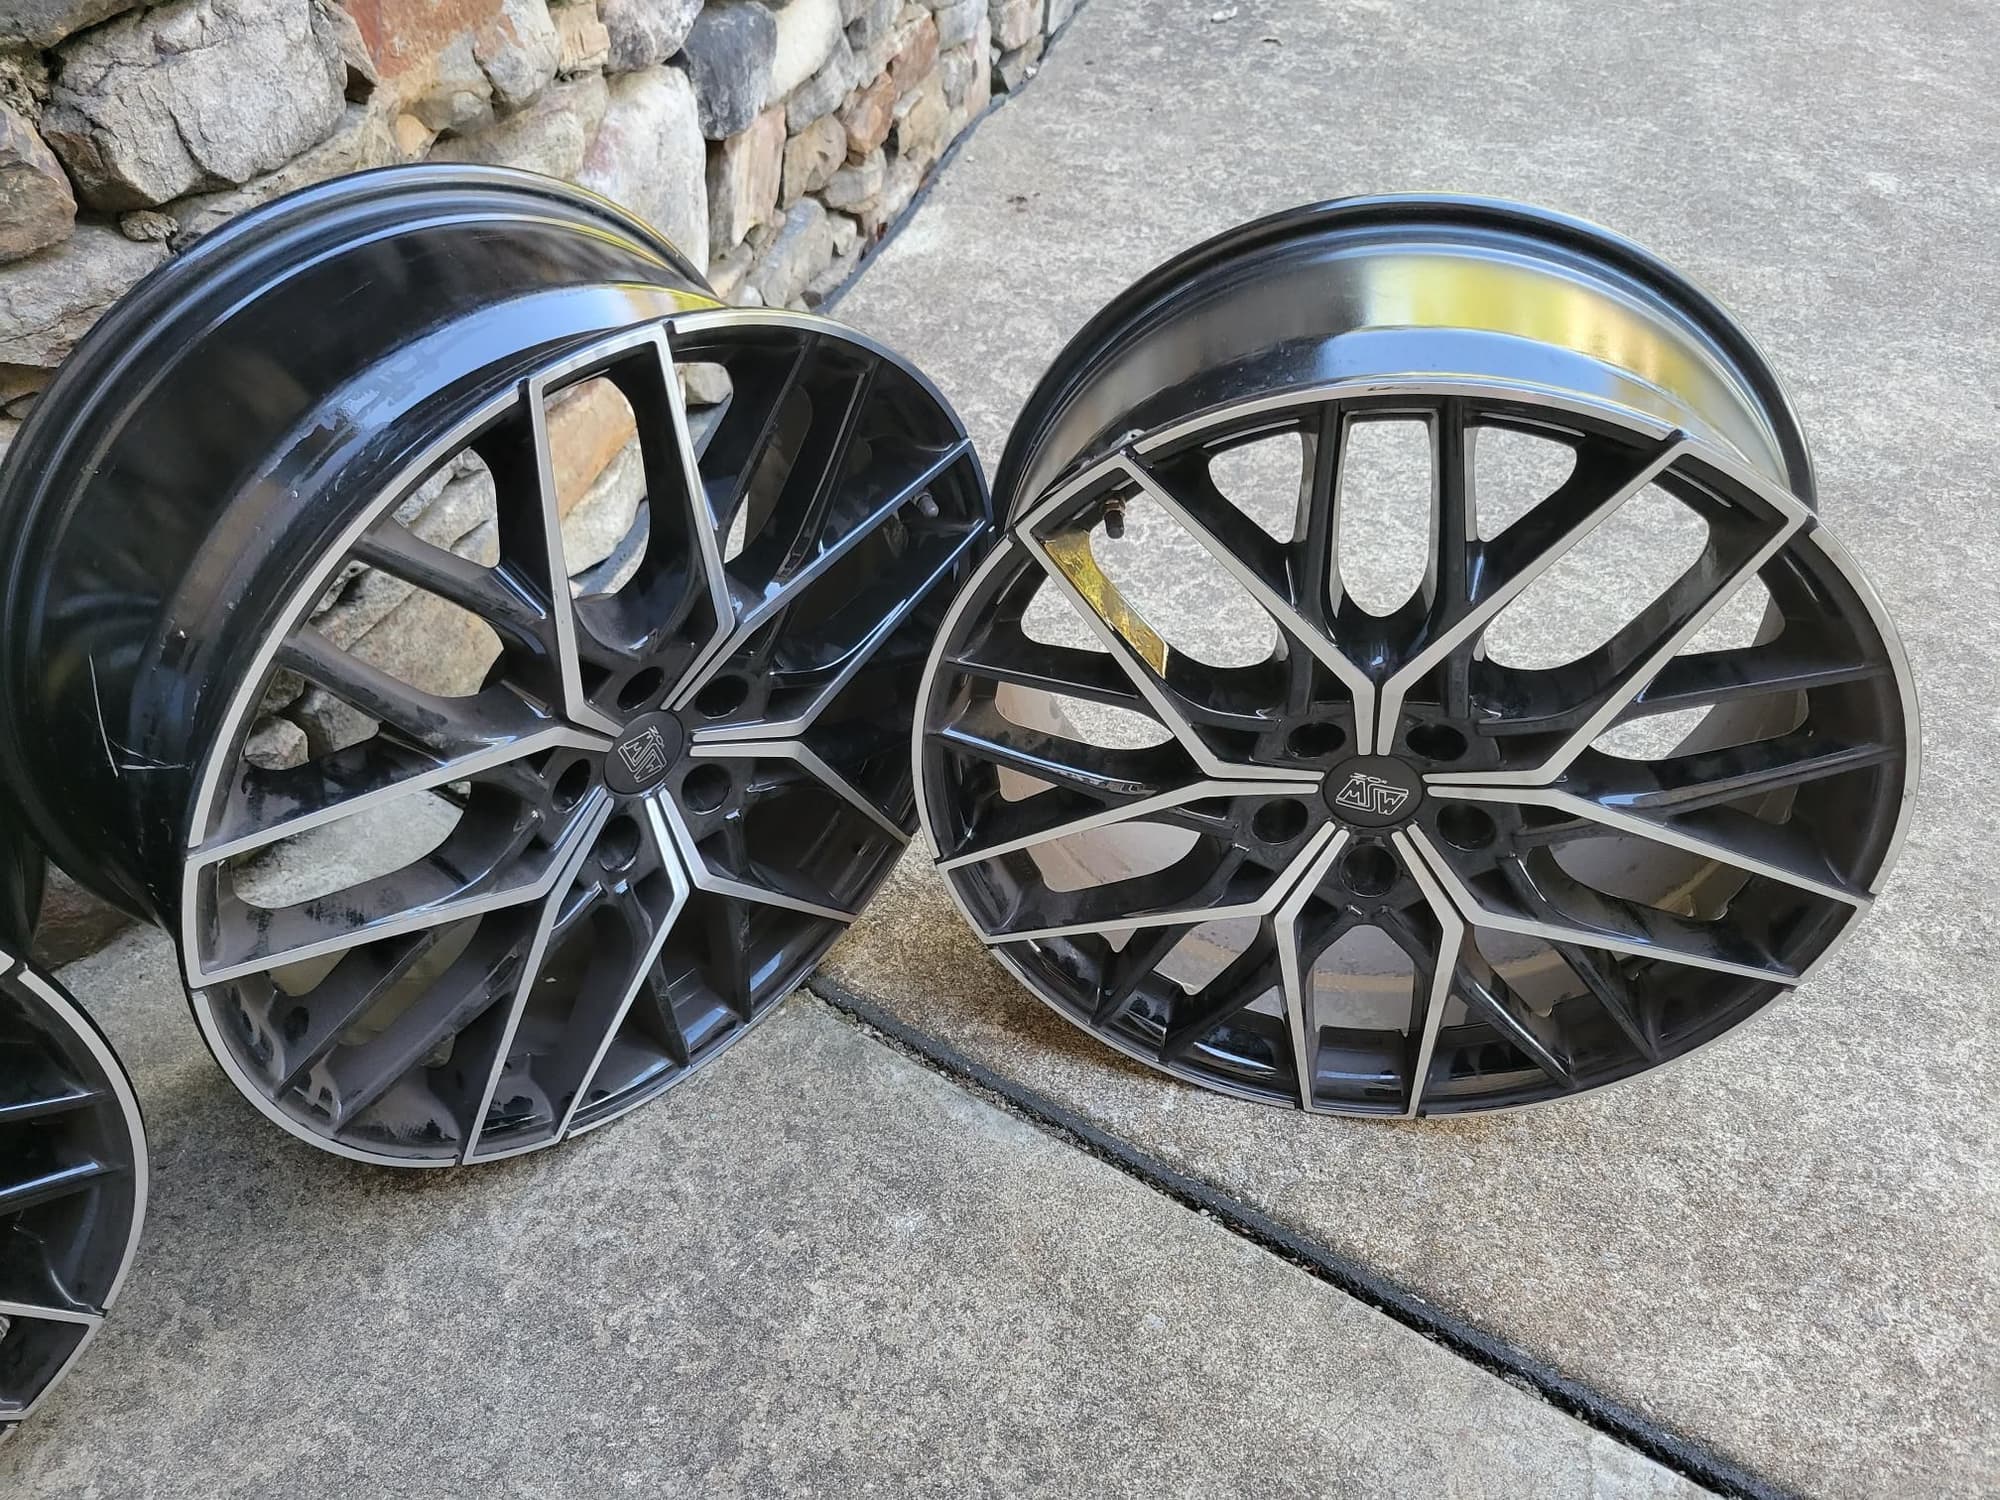 Wheels and Tires/Axles - 20 Inch Wheels for W222 - Used - 2014 to 2020 Mercedes-Benz S550 - Centre, AL 35983, United States